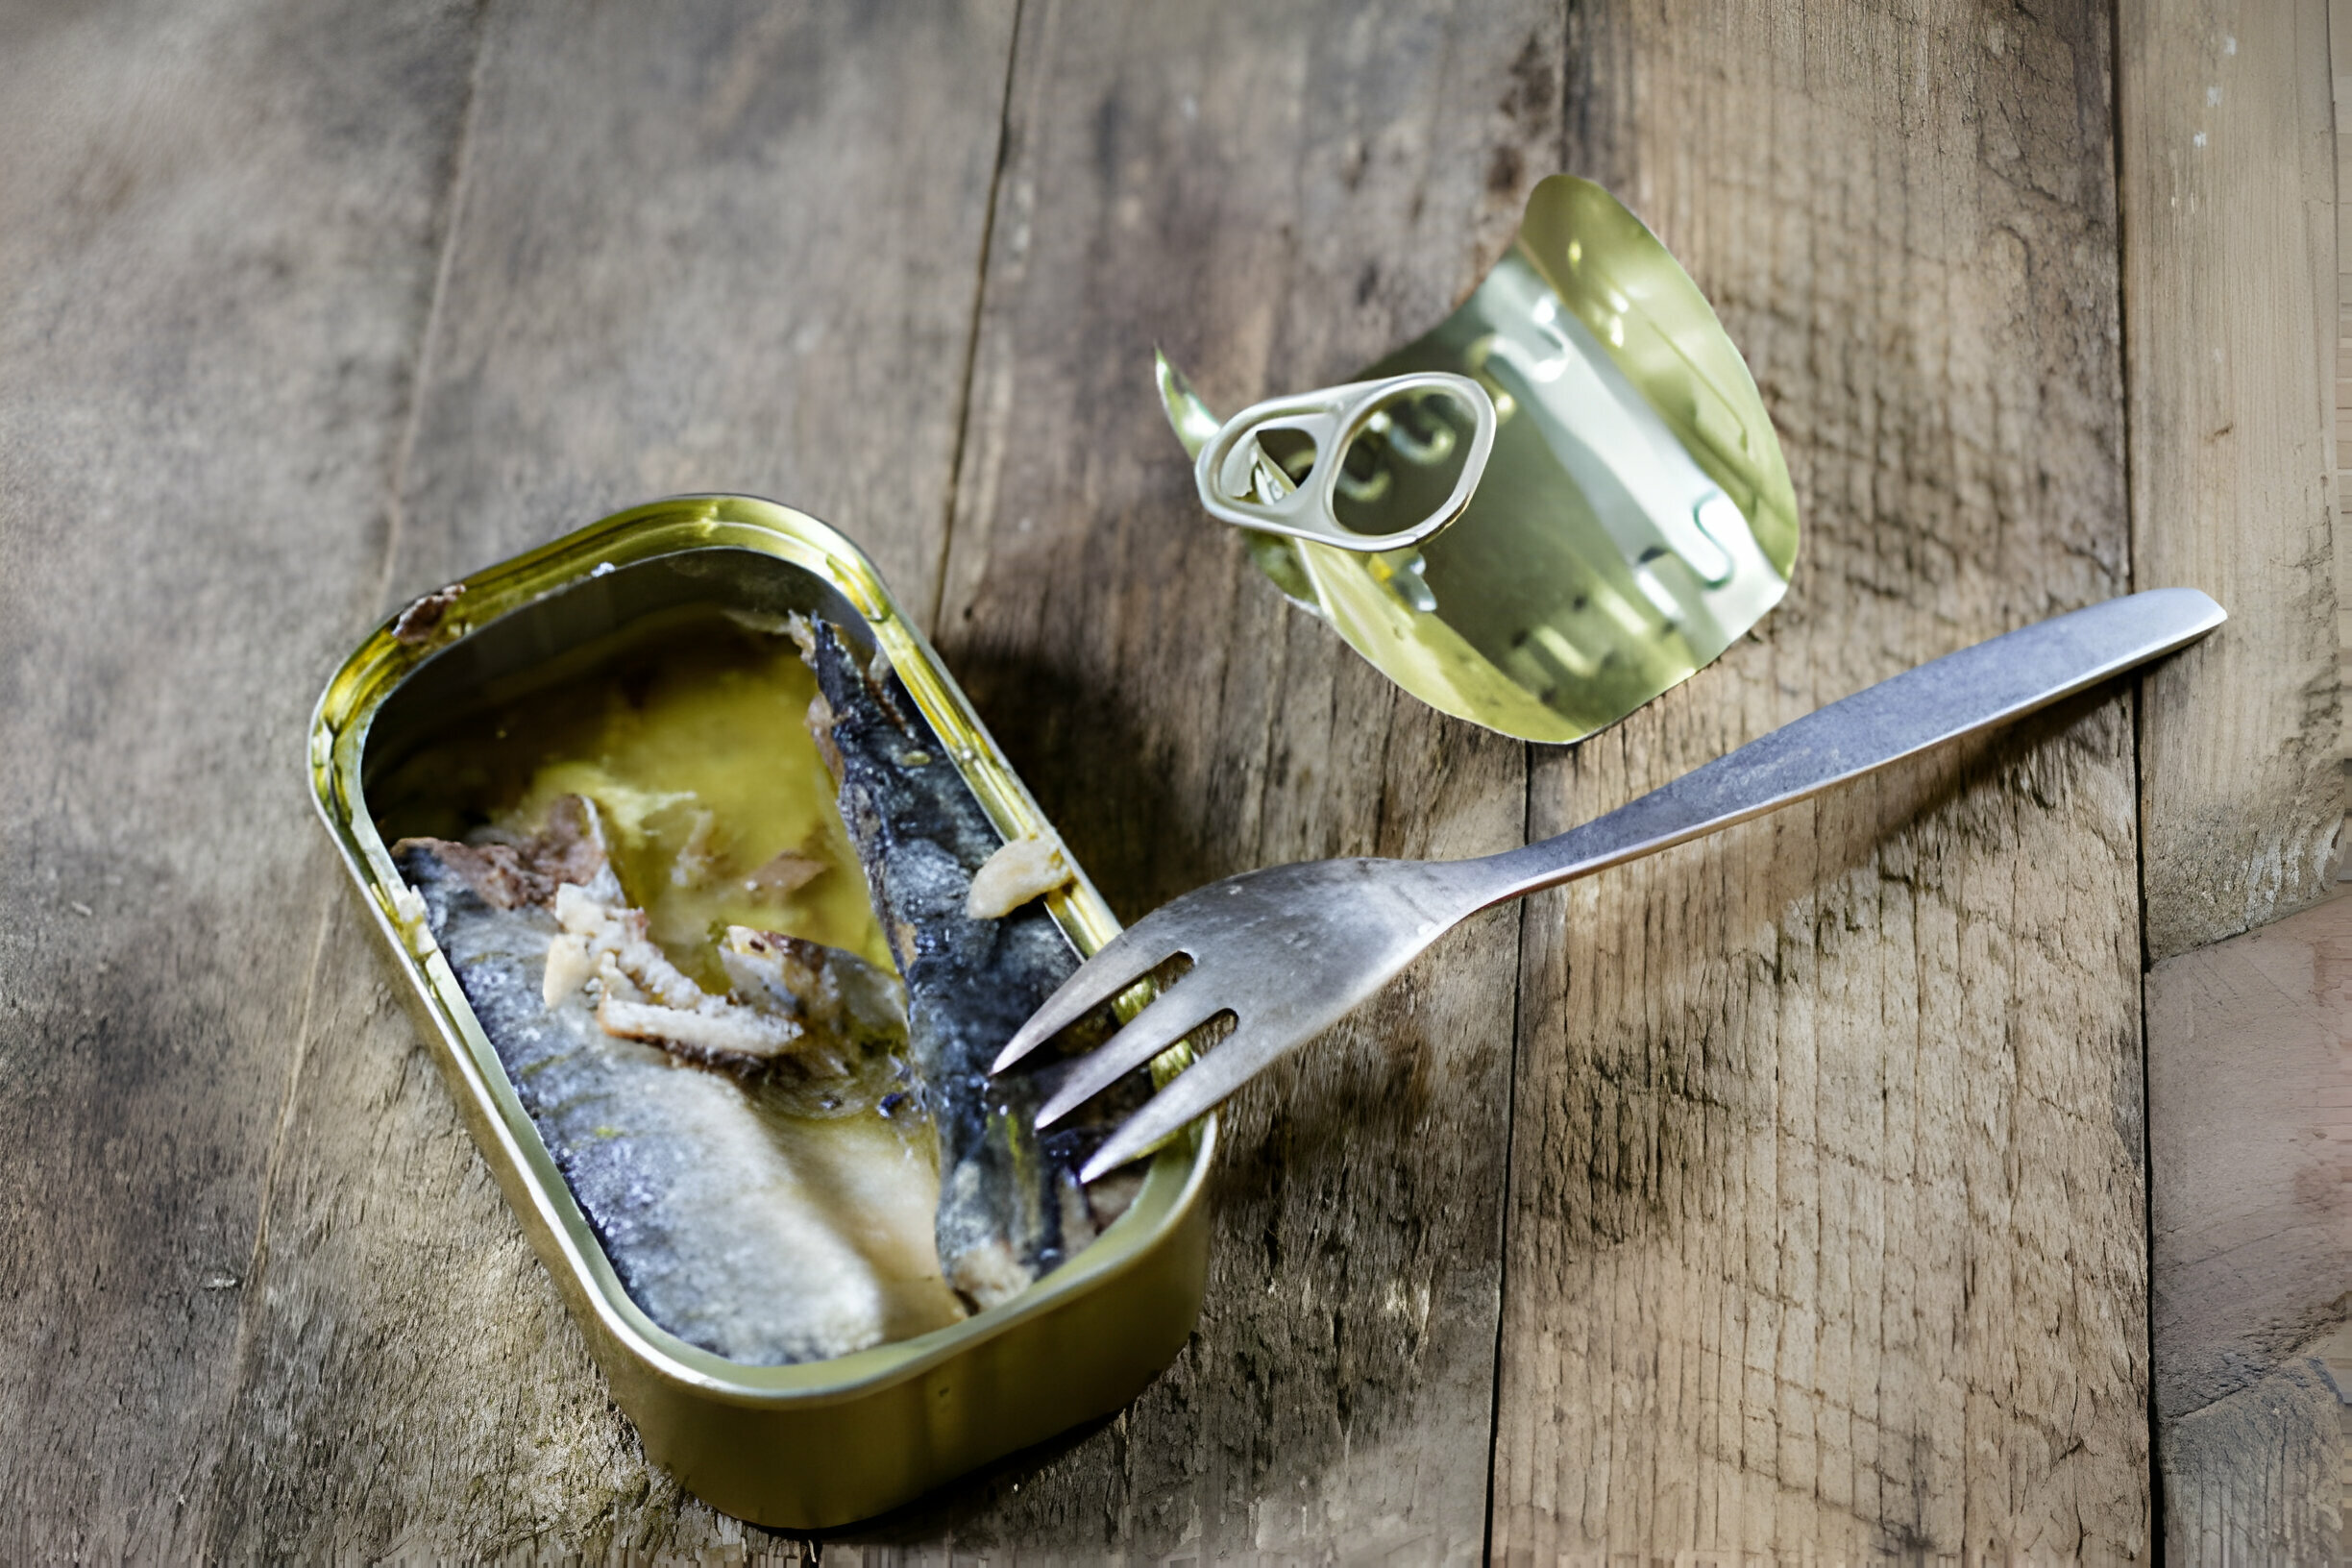 How do you remove bones from tinned fish?